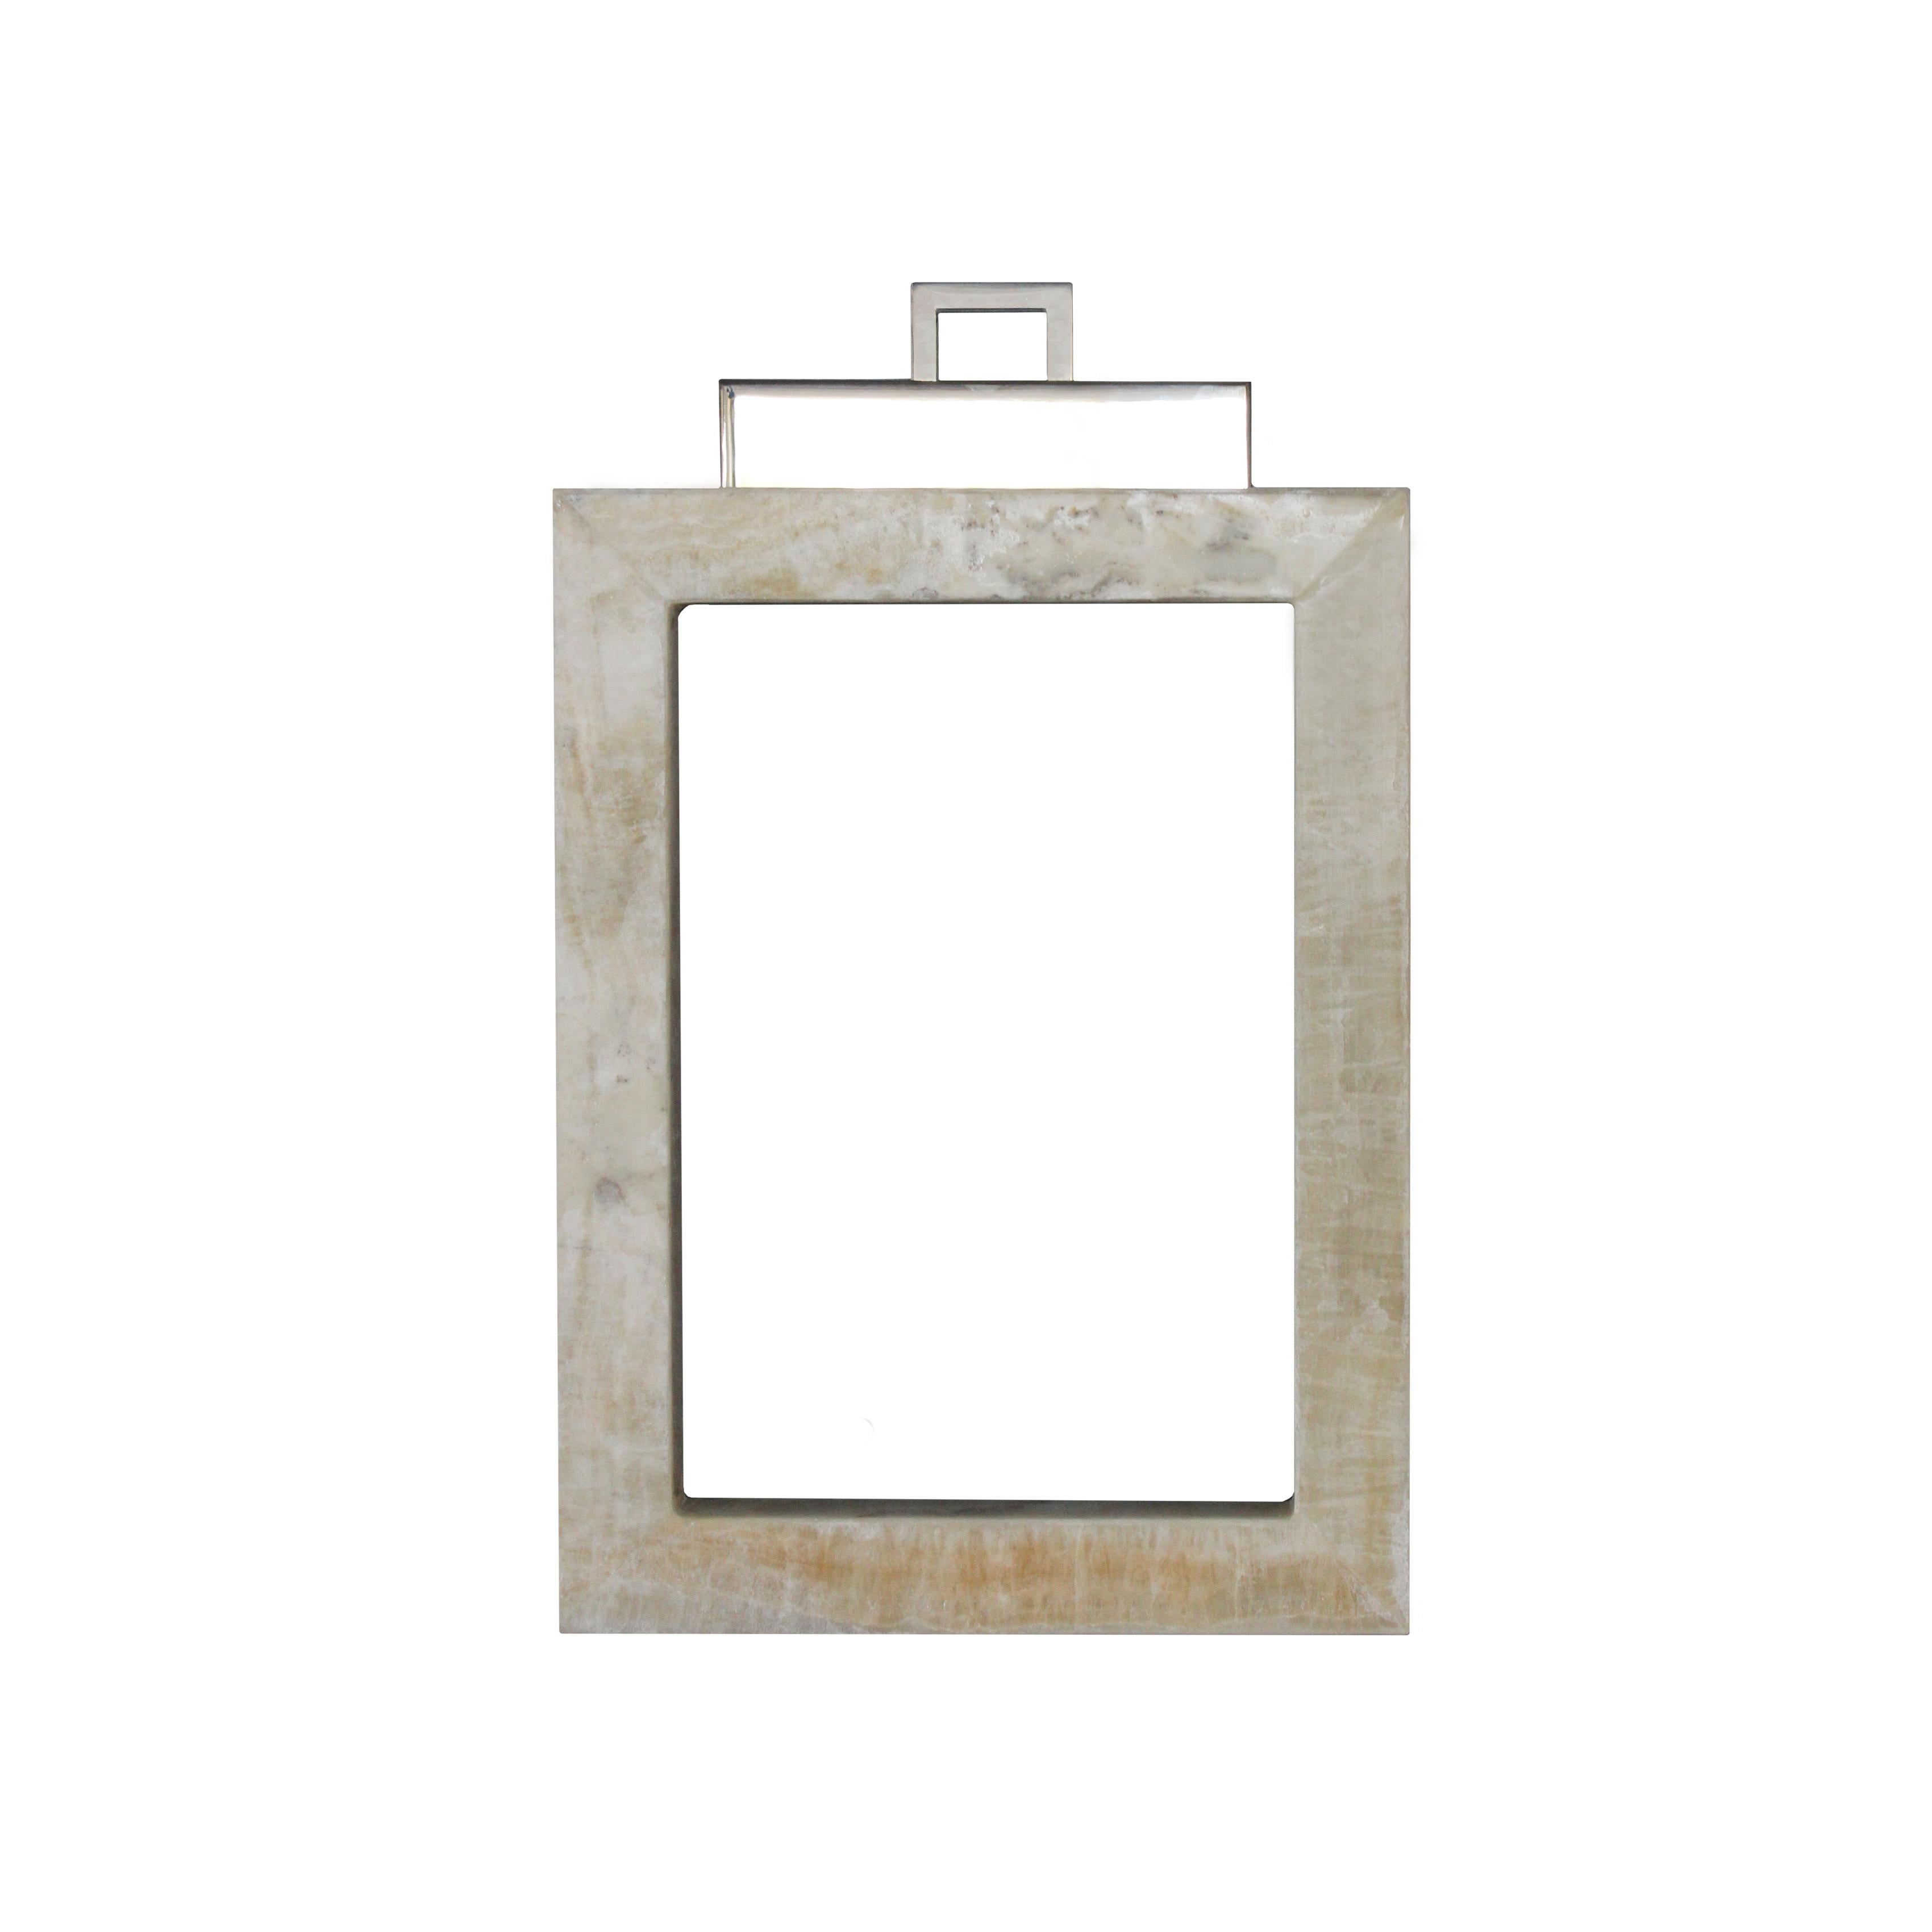 A luminous, essential and at the same time a precious and ancient frame like the onyx marble which it is made of. Uffizi is not just a decorative object but a real and functional lighting device, thanks to a special custom-made LED profile, capable